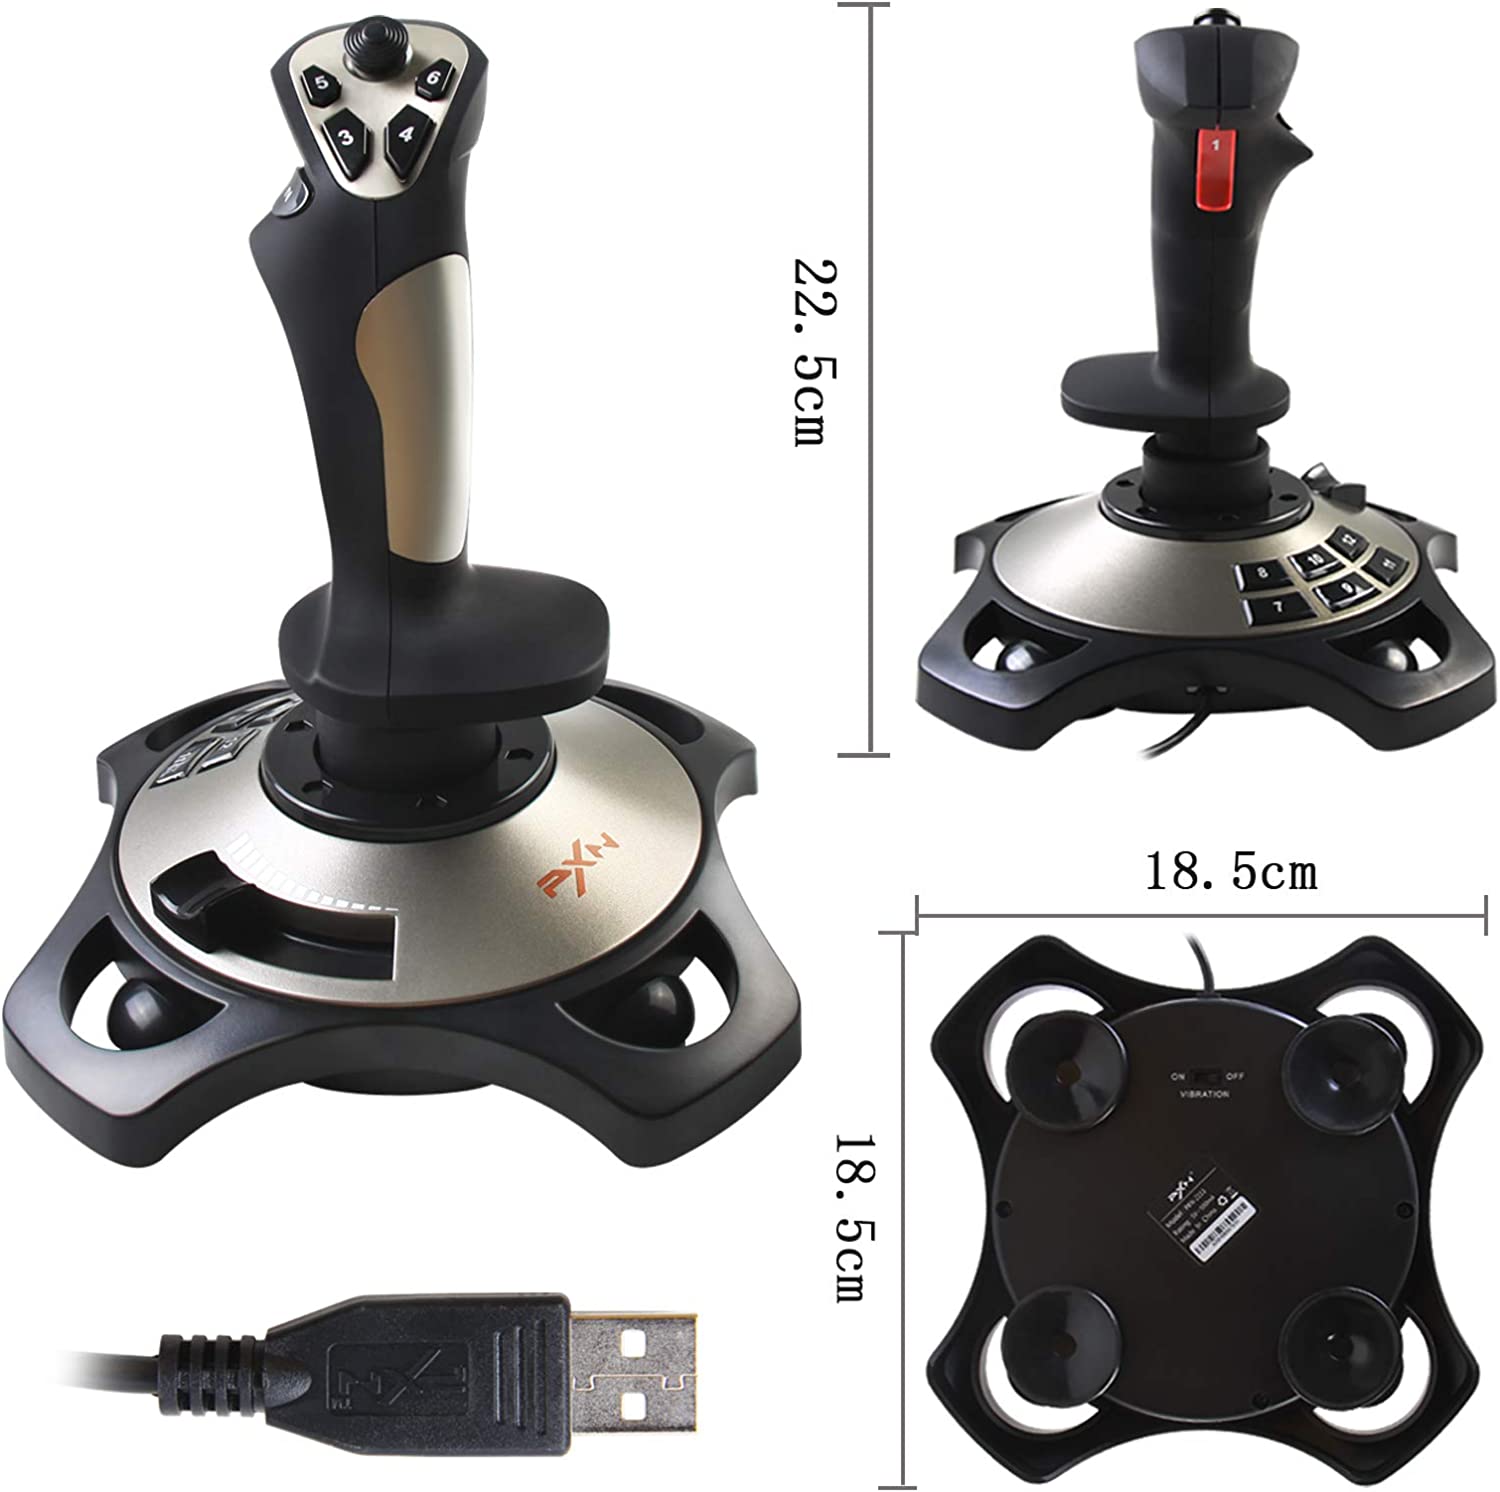 PC Joystick, USB Game Controller with Vibration Function and Throttle  Control, PXN 2113 Wired Gamepad Flight Stick for Windows PC/Computer